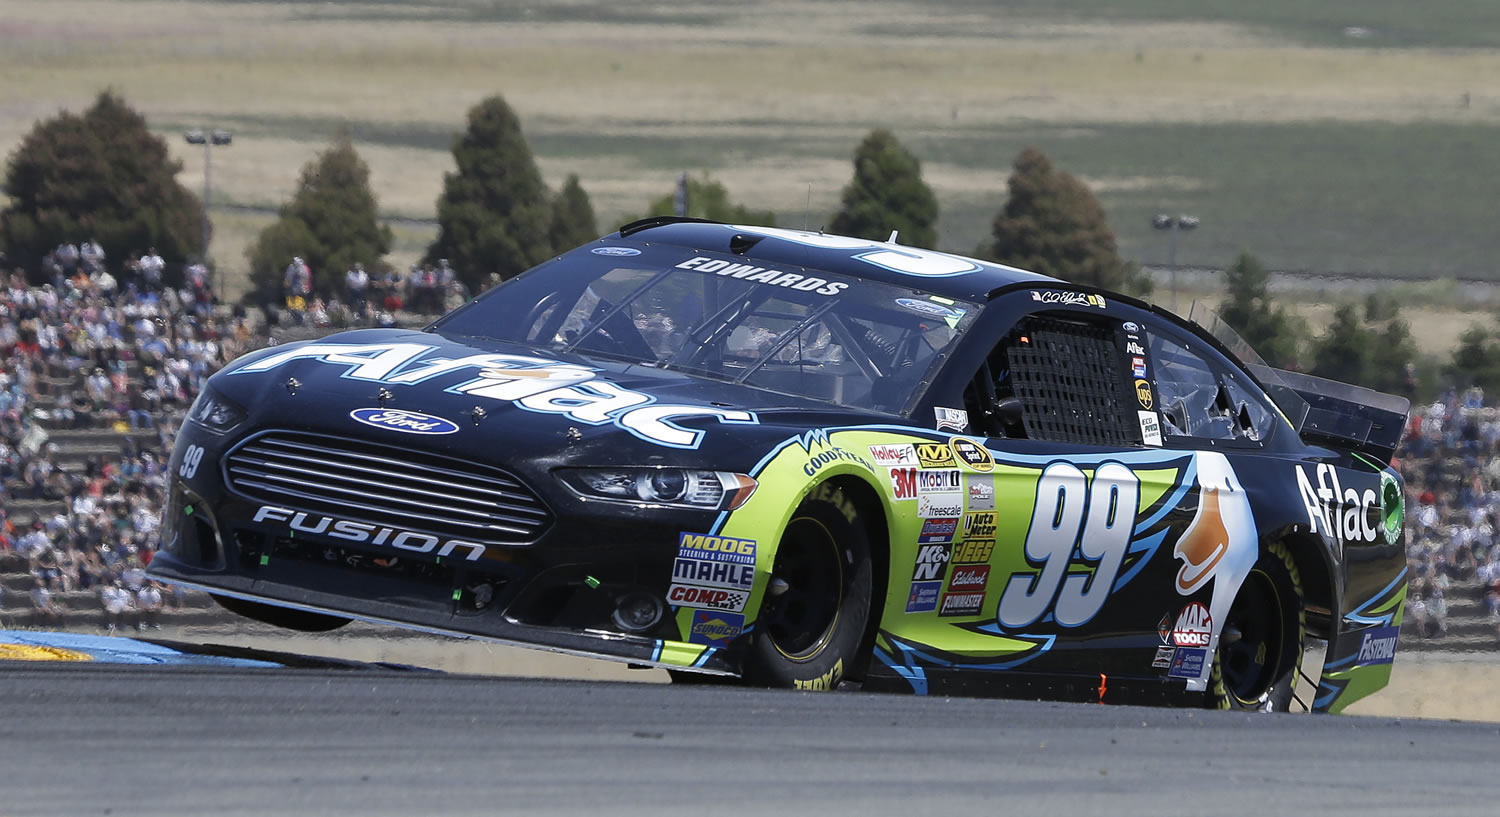 Carl Edwards competes during the NASCAR Sprint Cup Series auto race on Sunday, June 22, 2014, in Sonoma, Calif.